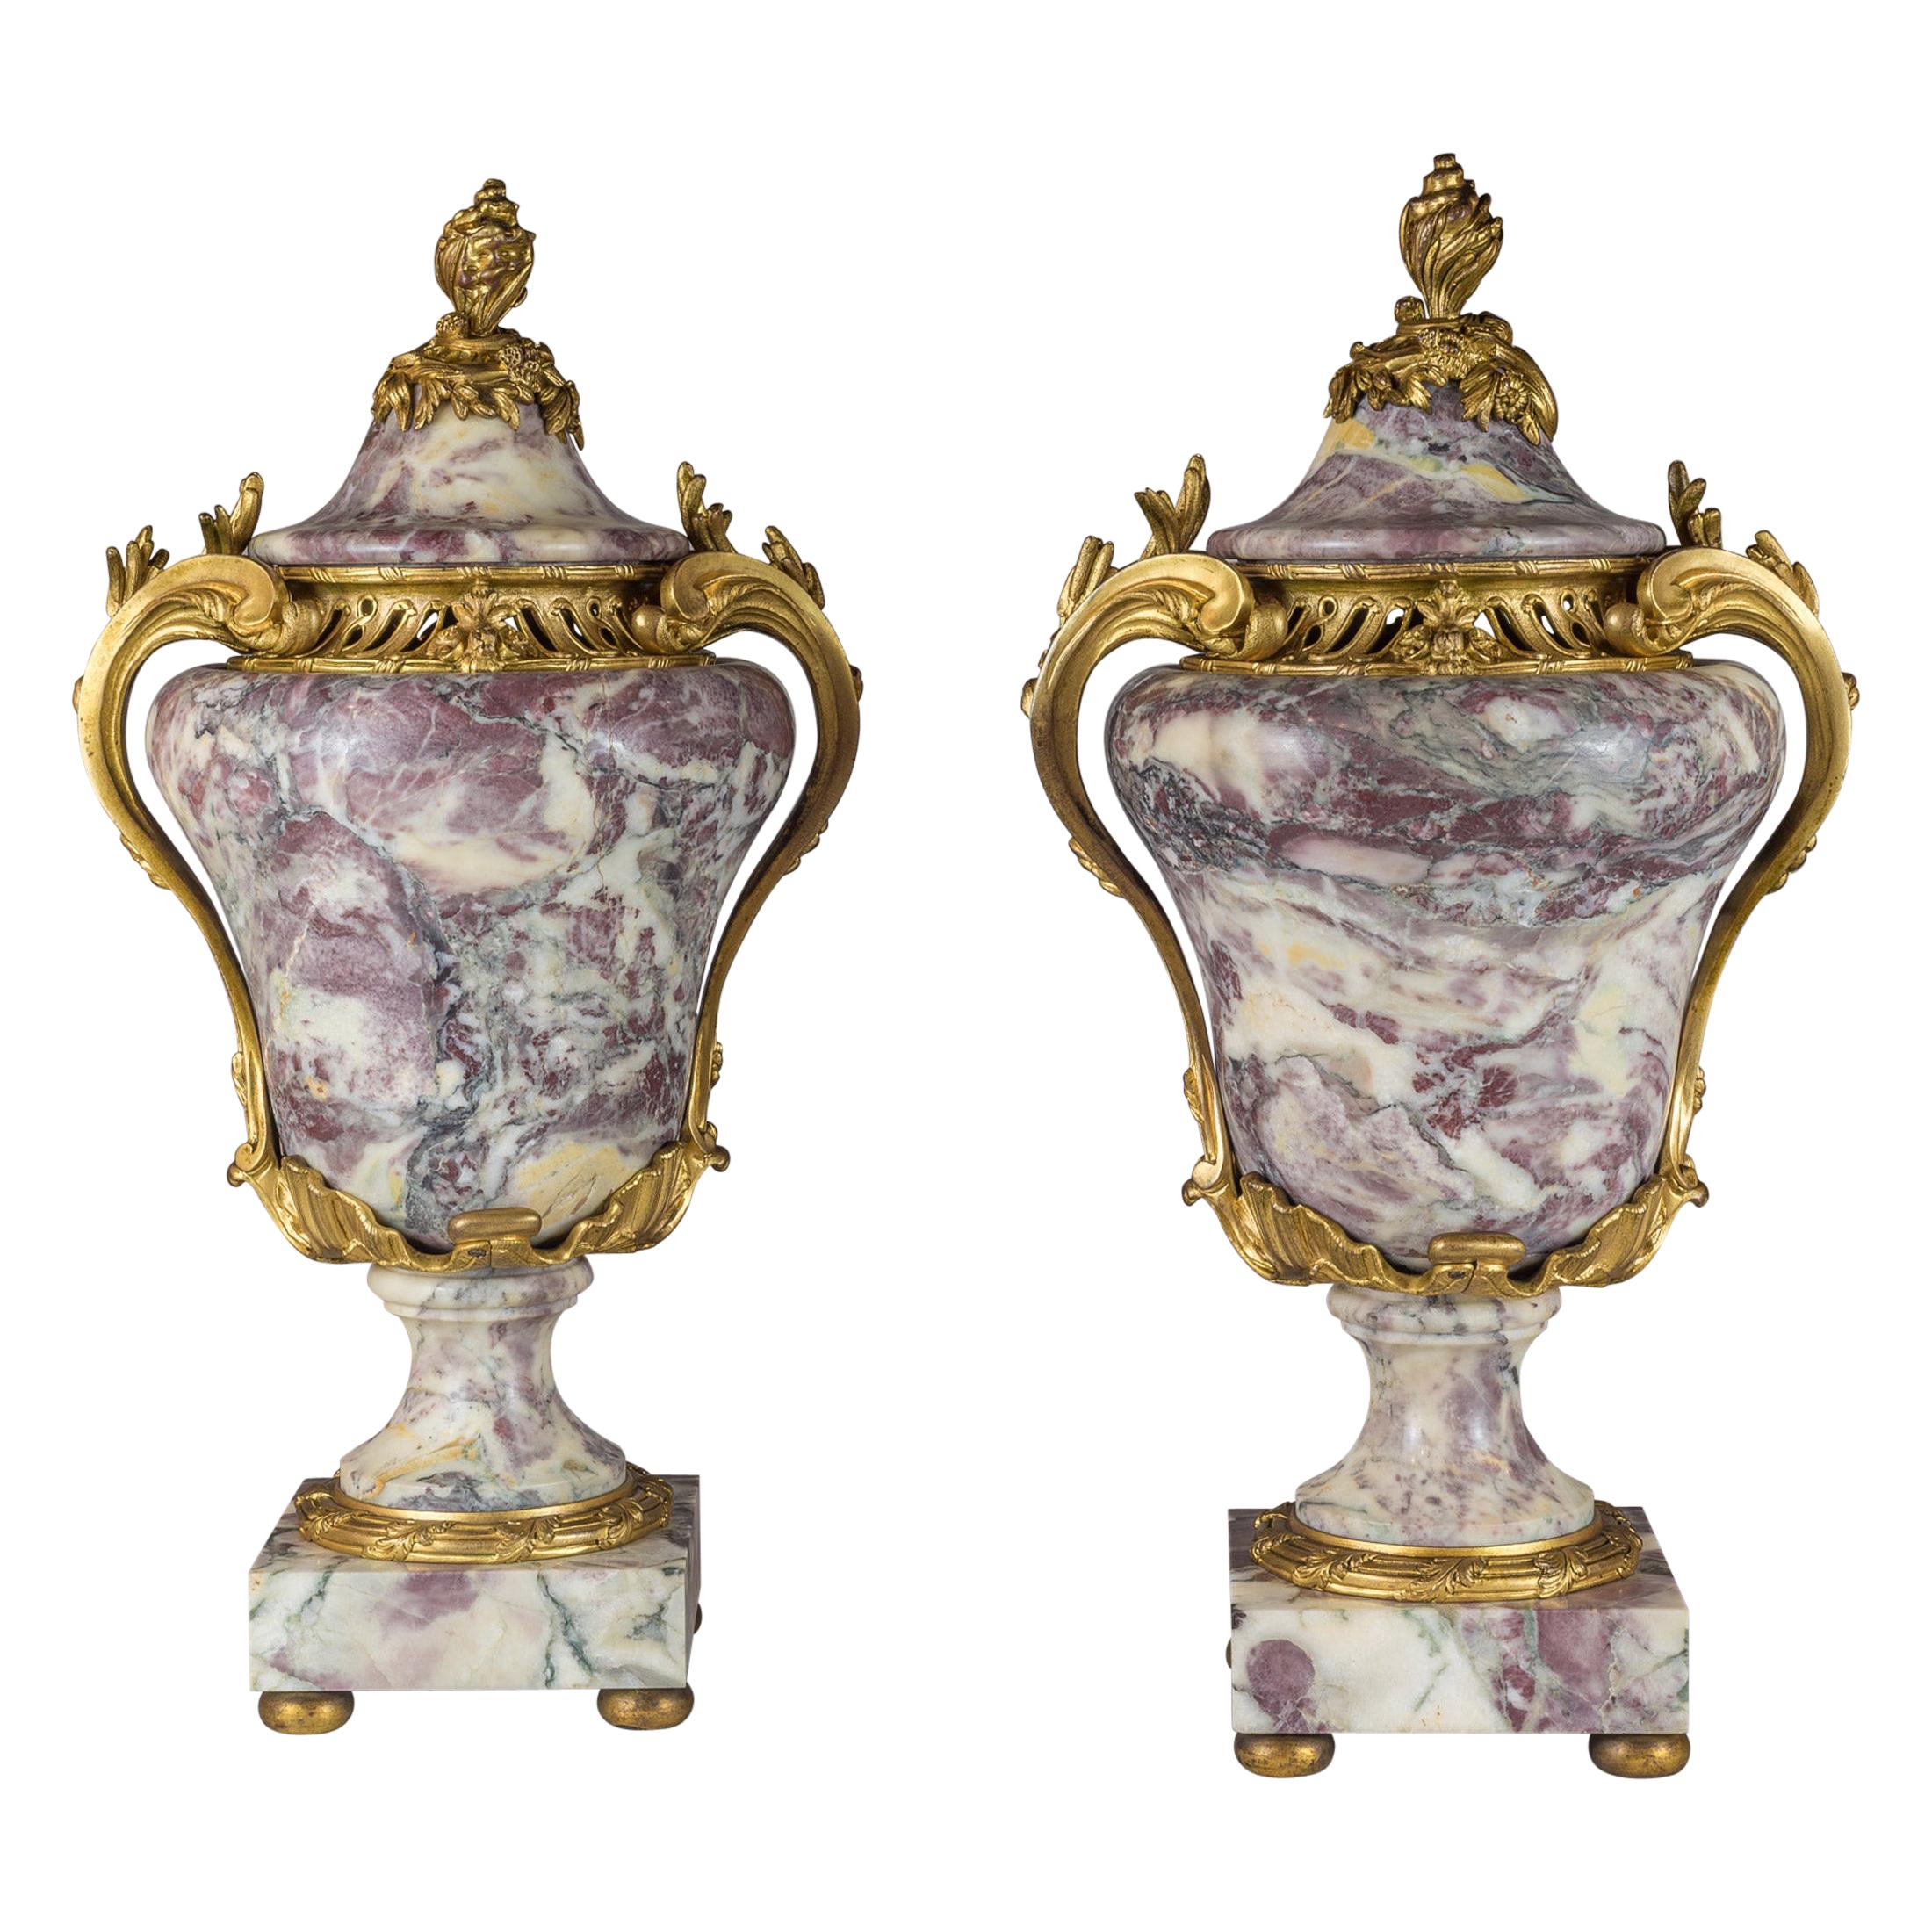 19th Century Pair of Louis XV Ormolu-Mounted Sarrancolin Marble Urn and Cover